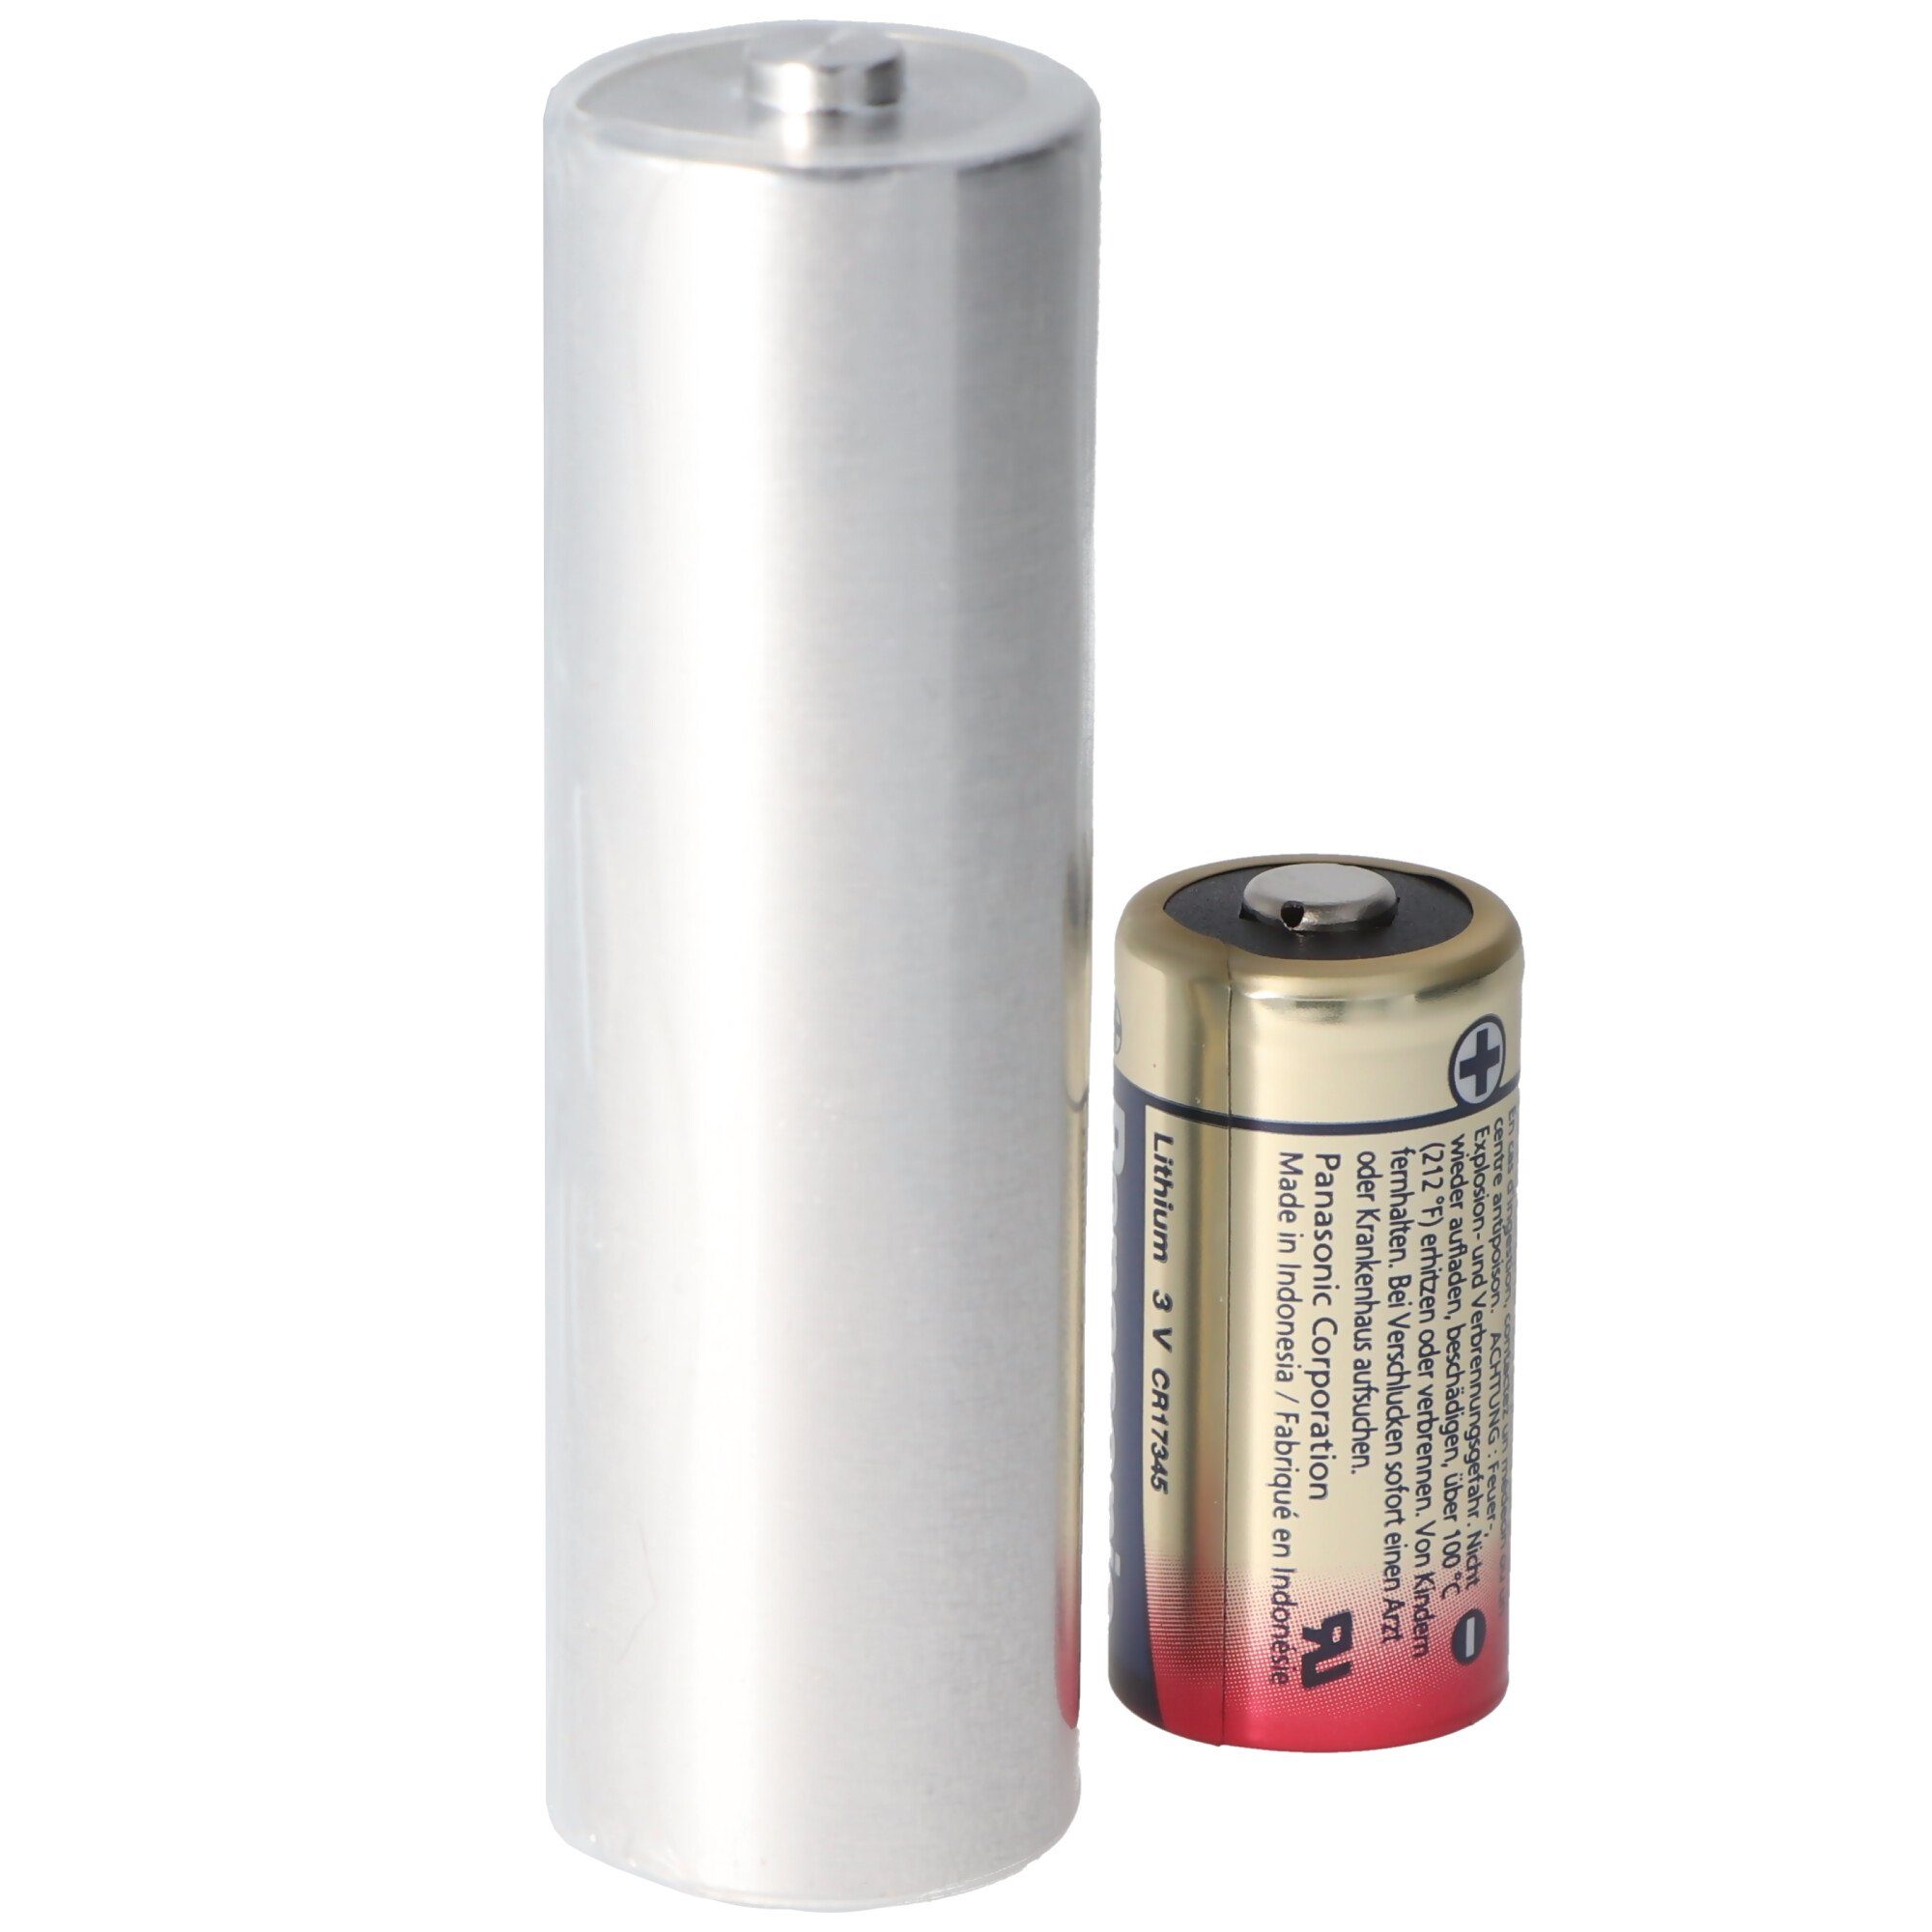 2R10R, 2010, Batterie Stab-Batterie, AccuCell Vo 3010, Batterie 3,0 Duplex 2R10 Adapter